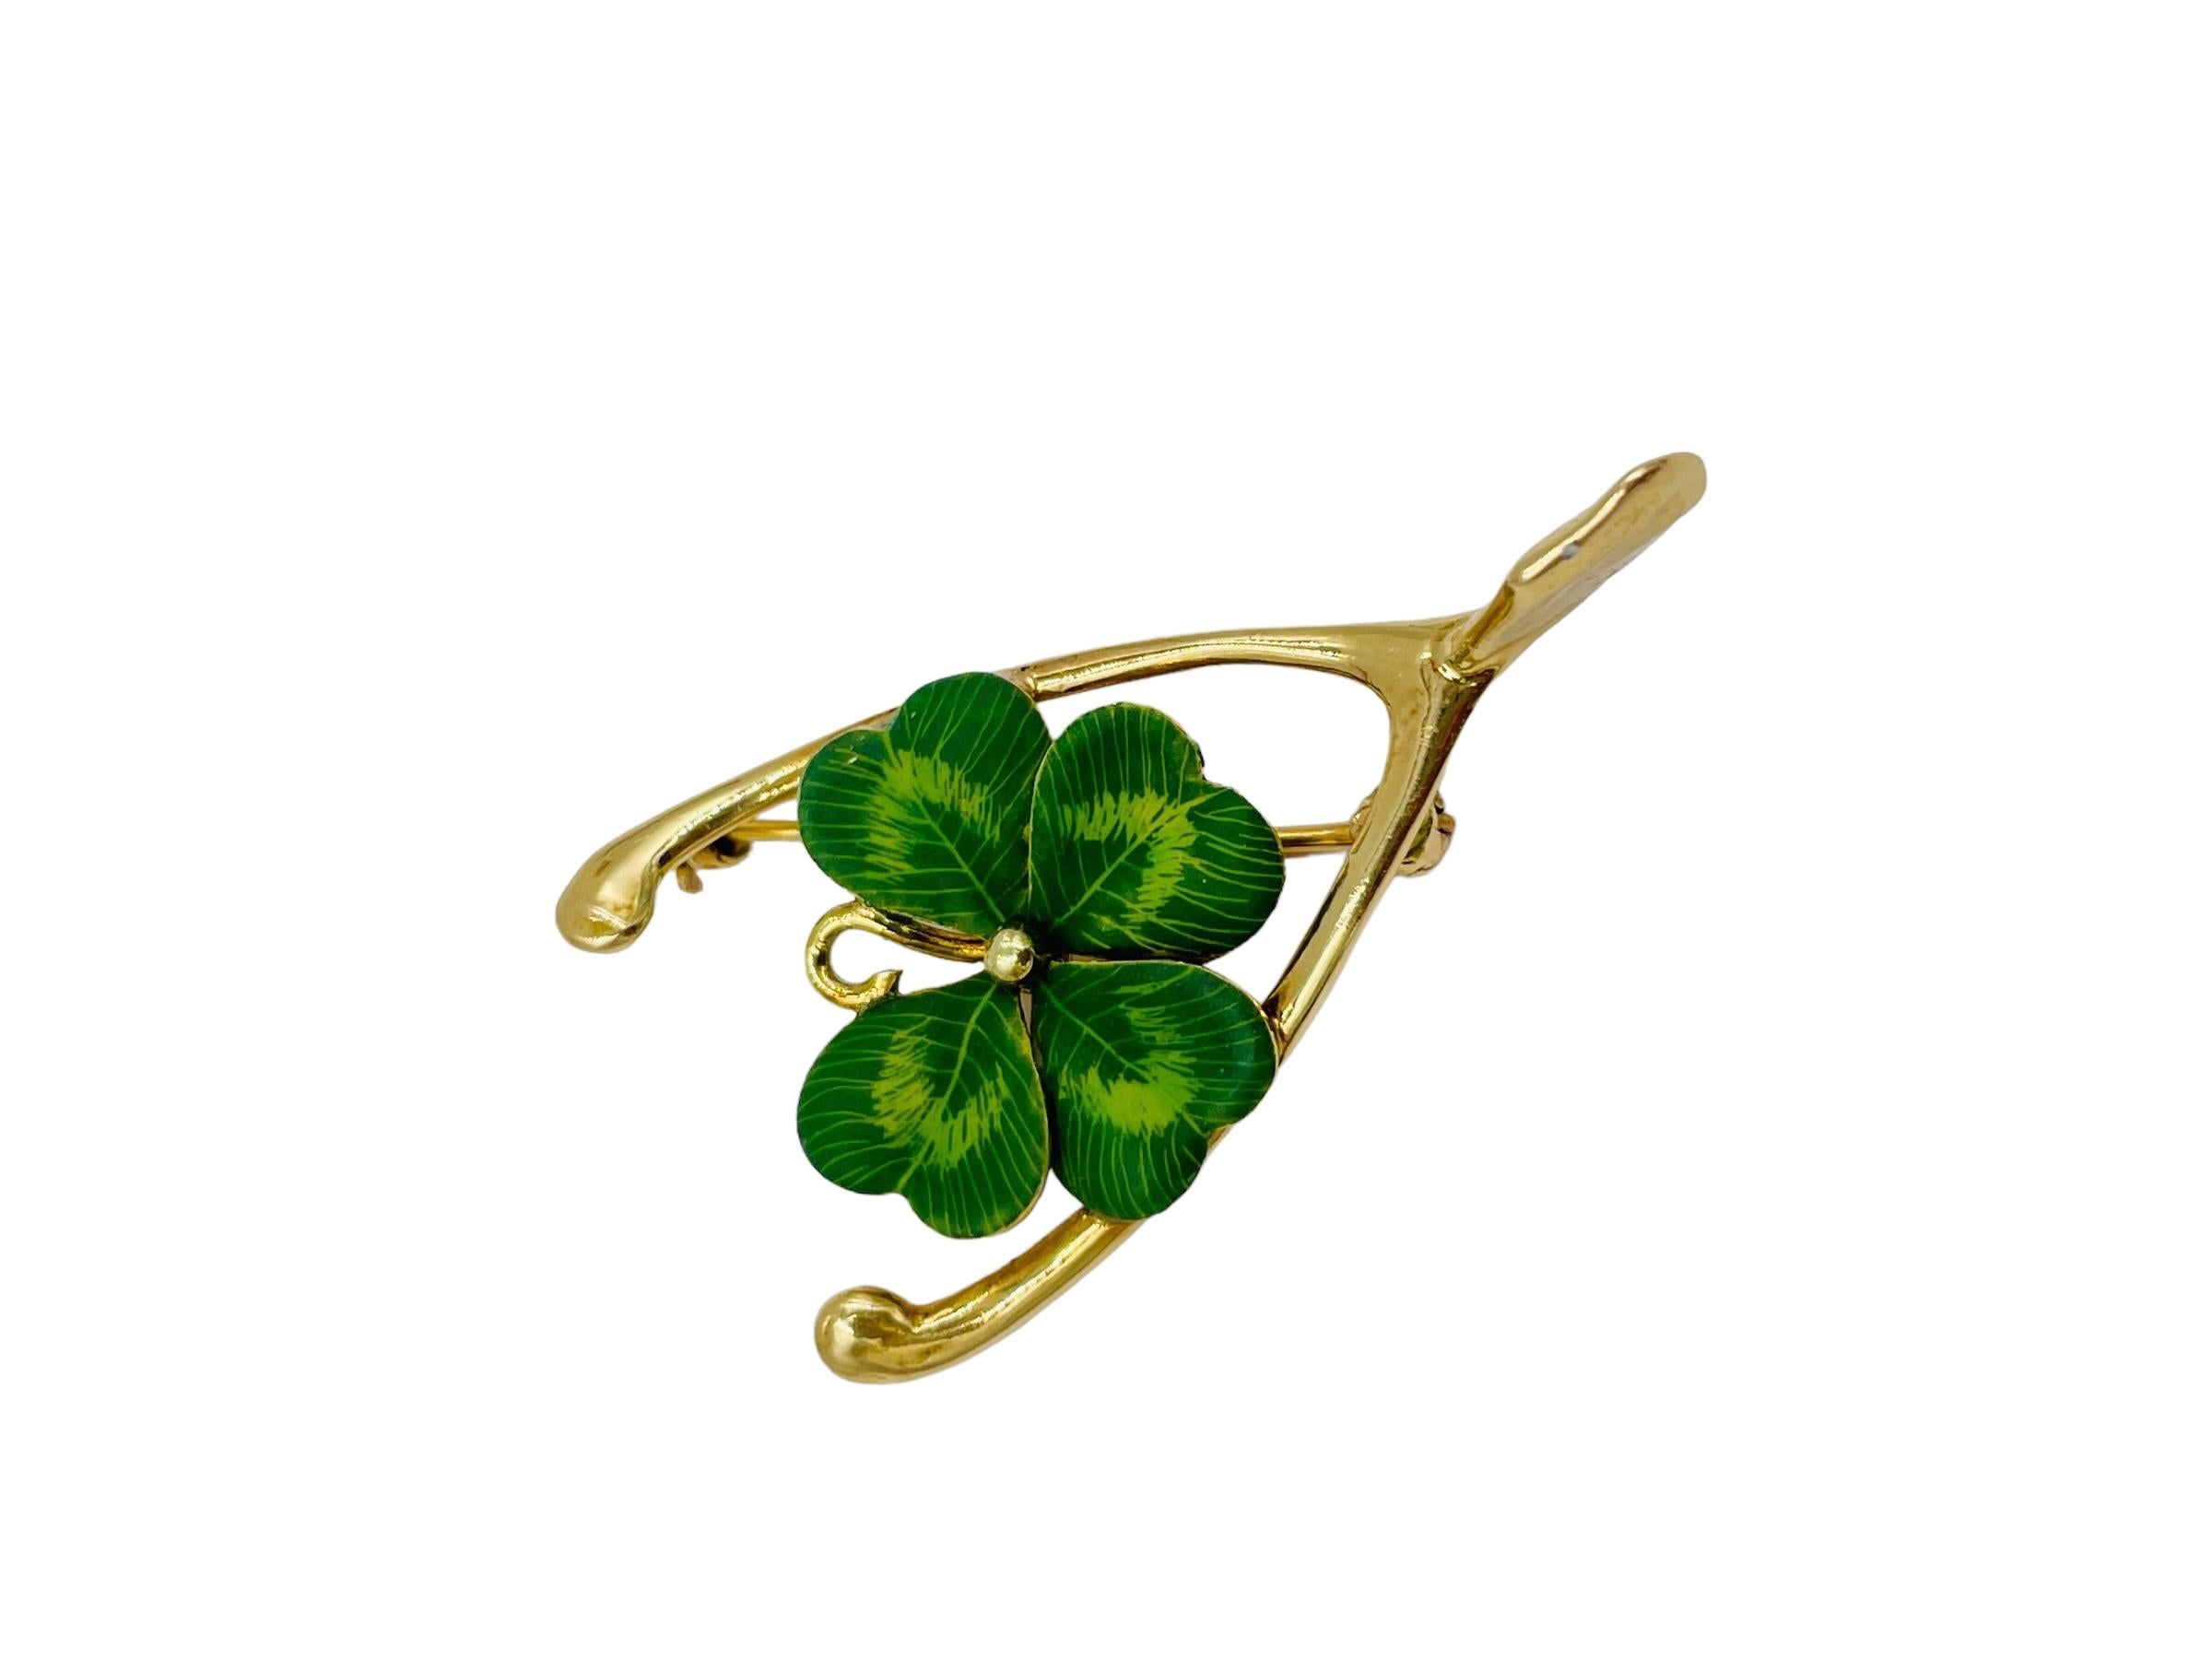 Enamel 4 Leaf Clover Wishbone yellow gold brooch, ca 1910.

SPECIFICATIONS:  P-DJ812I   What a great good luck charm!!!  Enamel in great condition.

METAL: 14k yellow gold

DIMENSIONS: 1-5/8” X 13/16”

WEIGHT: 5.6 grams 

CONDITION: high